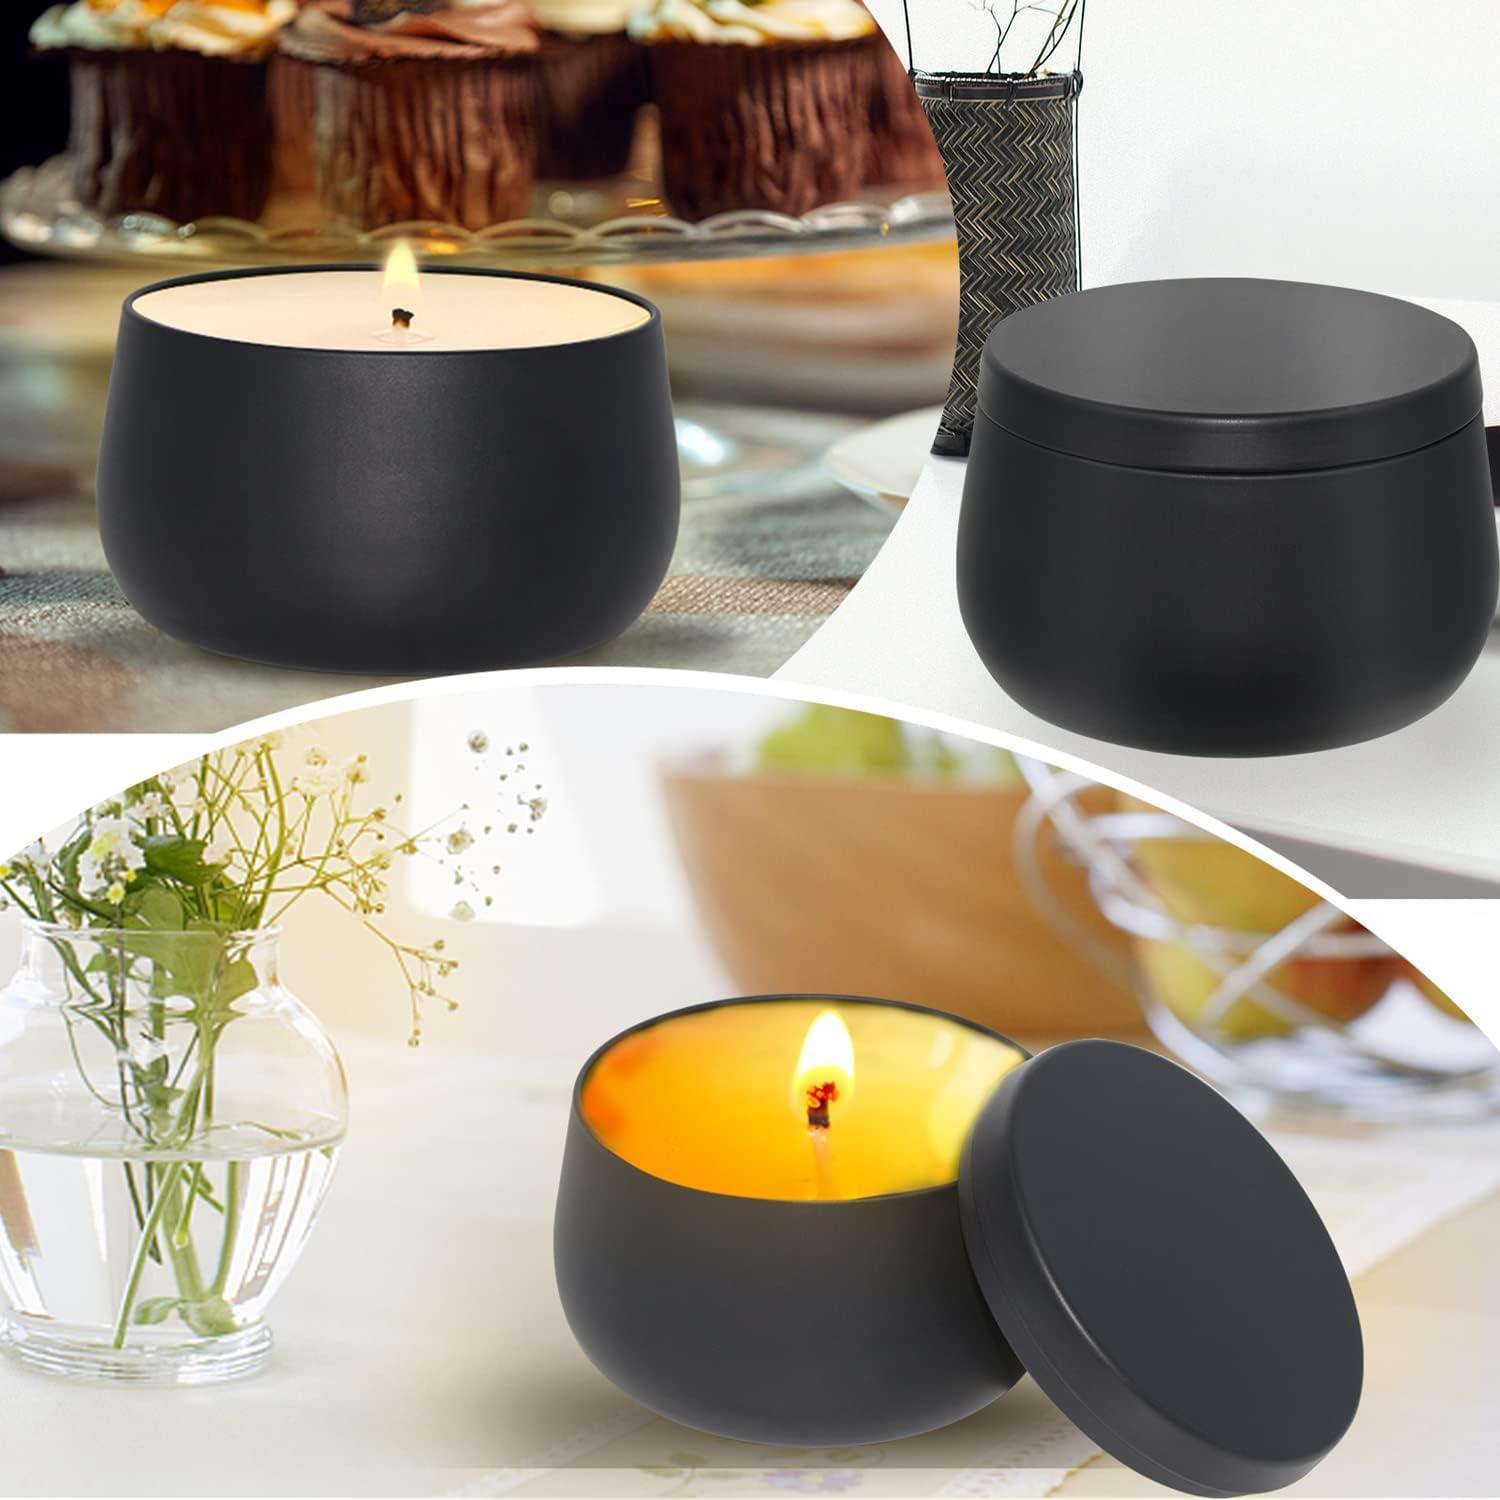 24 Pieces 4 oz Black Candle Tins,4oz Candle Jars Candle Containers with  Lids, 4 oz, for Candles Making, Arts & Crafts, Storage, and Gifts (Black  24PCS)